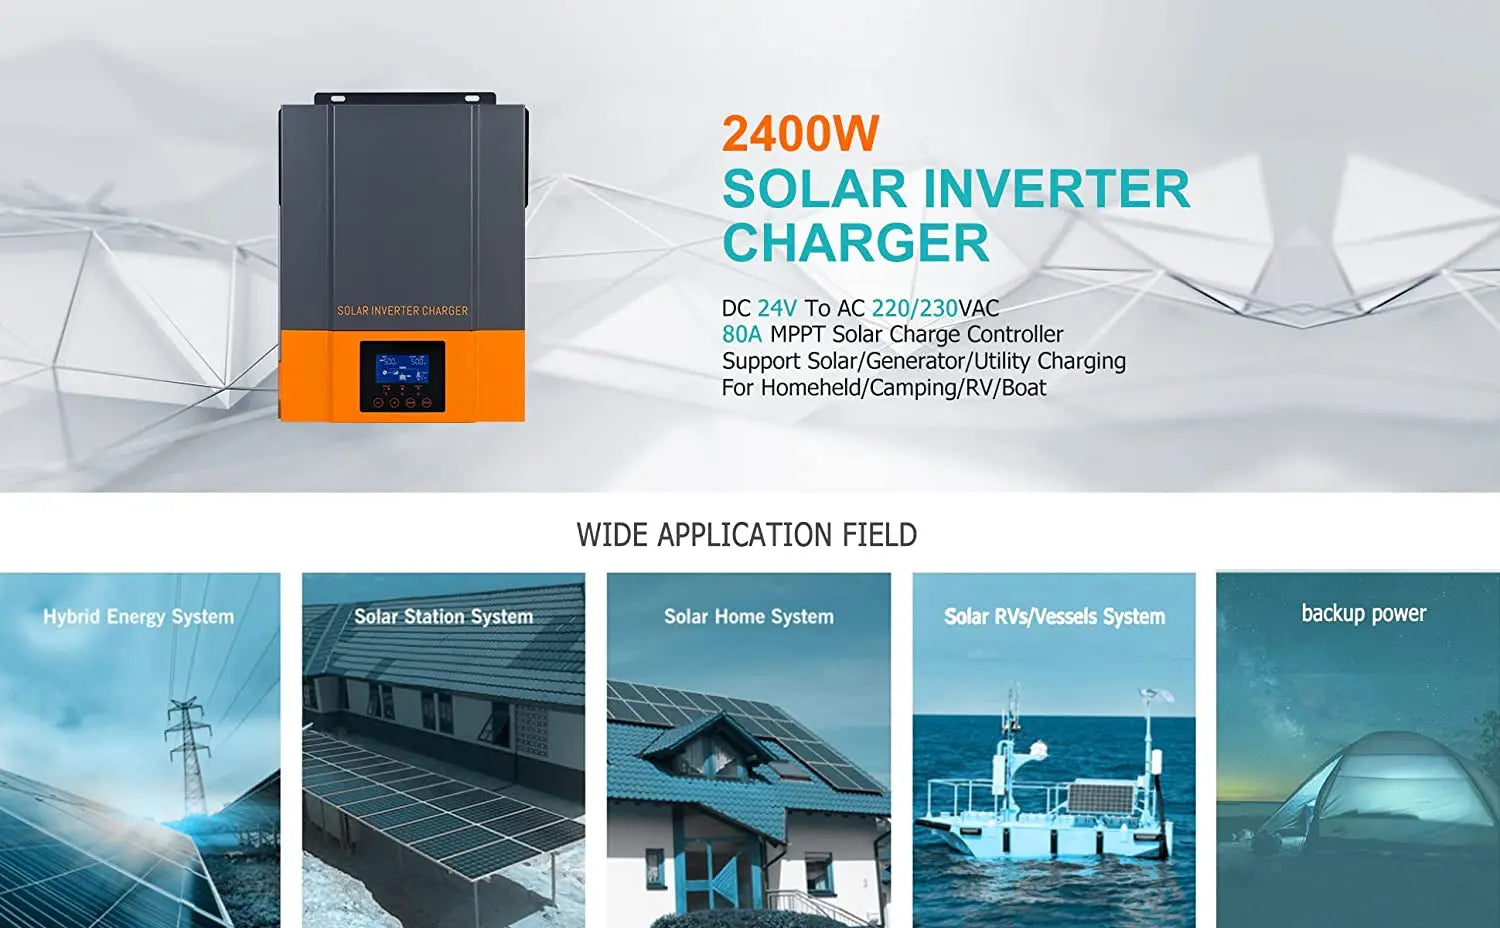 PowMr Hybrid Solar Inverter: converts DC power to AC power, suitable for homes, camping, RVs, and boats.